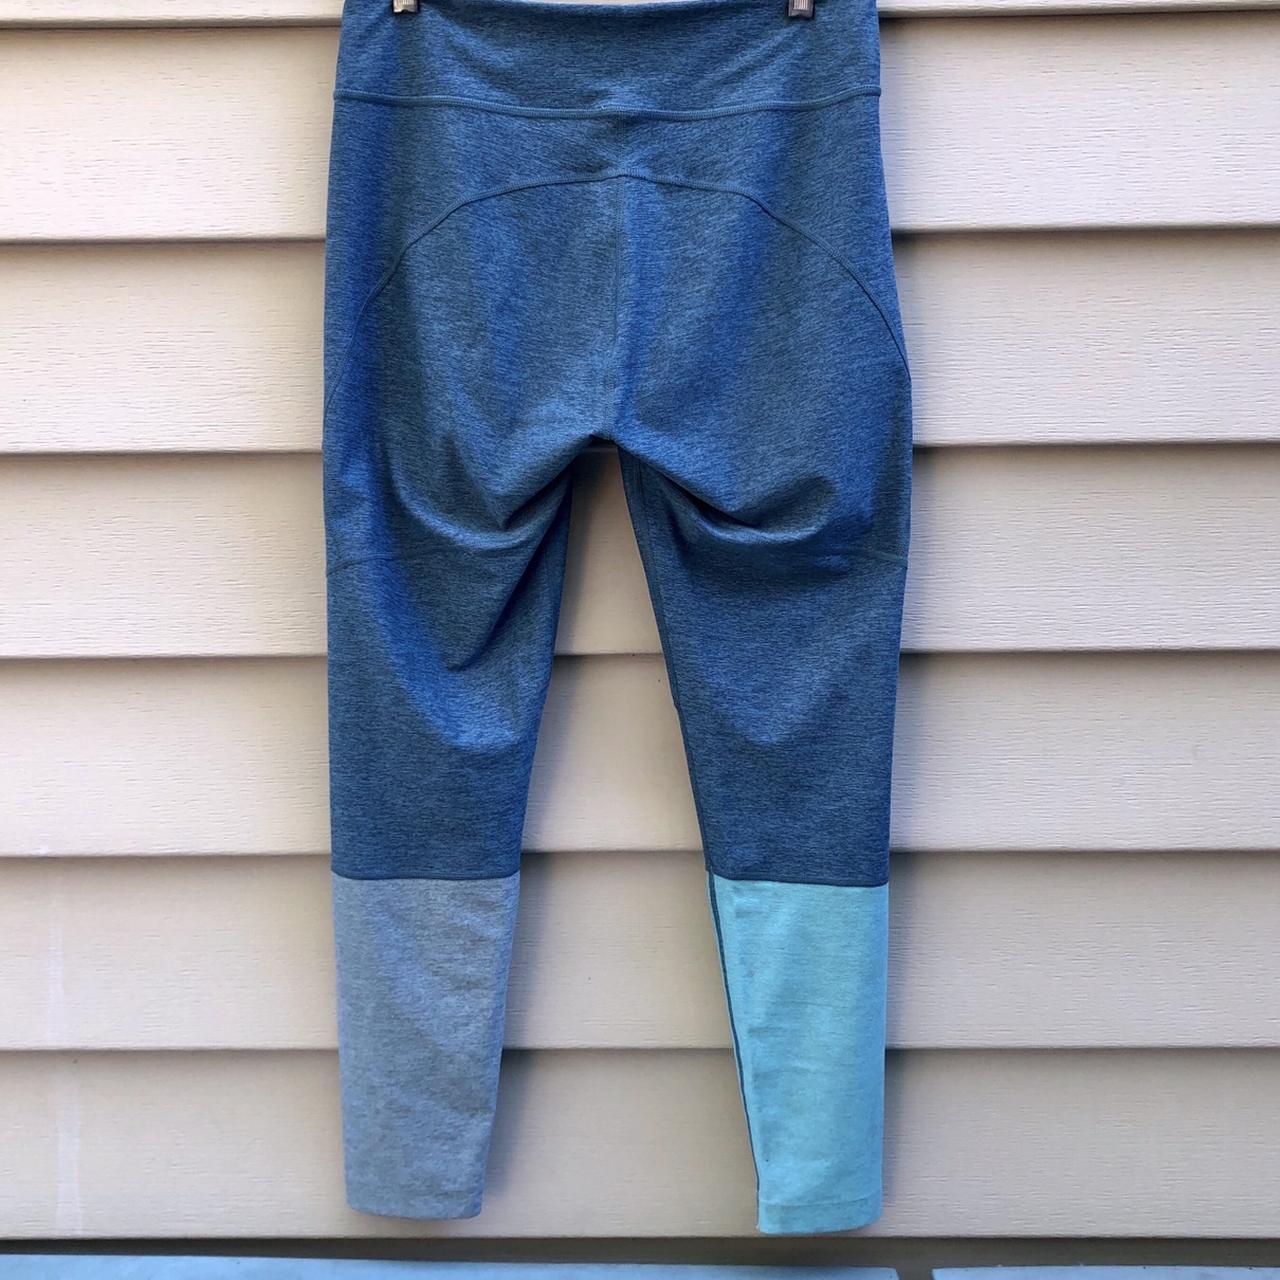 Outdoor Voices Dipped 7/8 Leggings Black Blue Gray - Depop